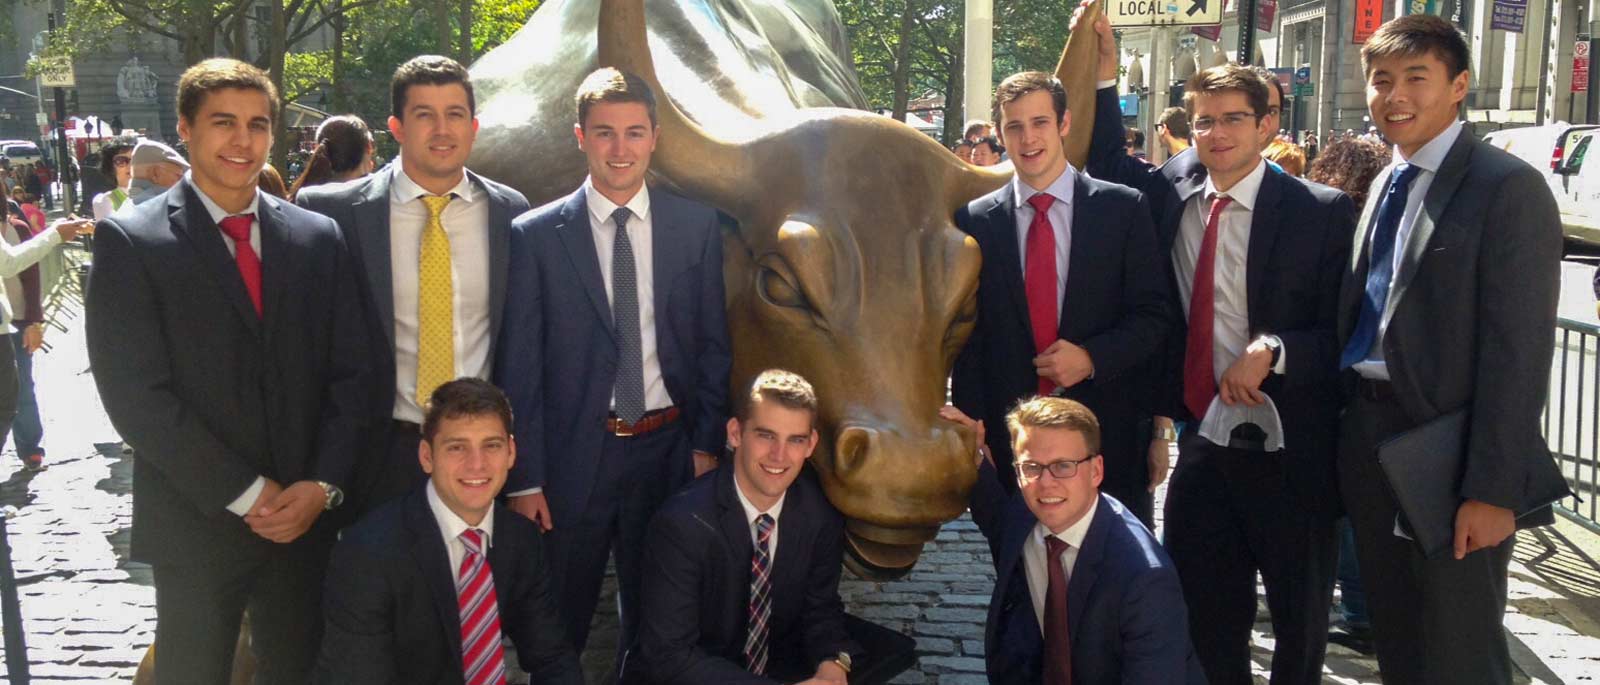 Group of FMI scholars in business professional attire gather around the Wall Street bull on a sunny day.